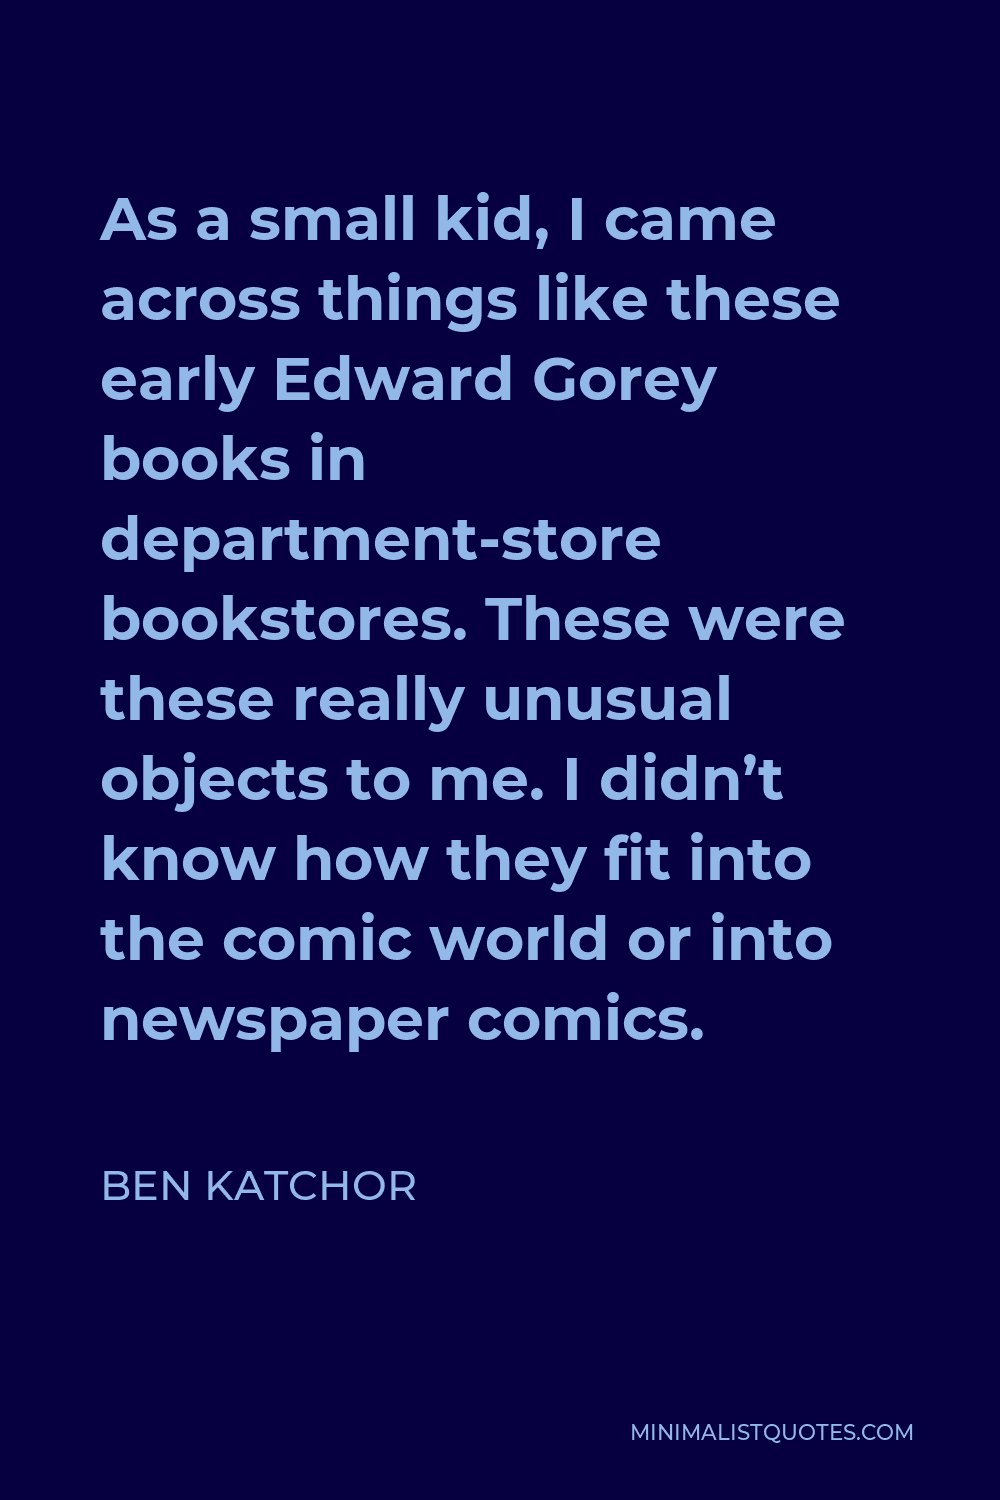 Ben Katchor Quote - As a small kid, I came across things like these early Edward Gorey books in department-store bookstores. These were these really unusual objects to me. I didn’t know how they fit into the comic world or into newspaper comics.